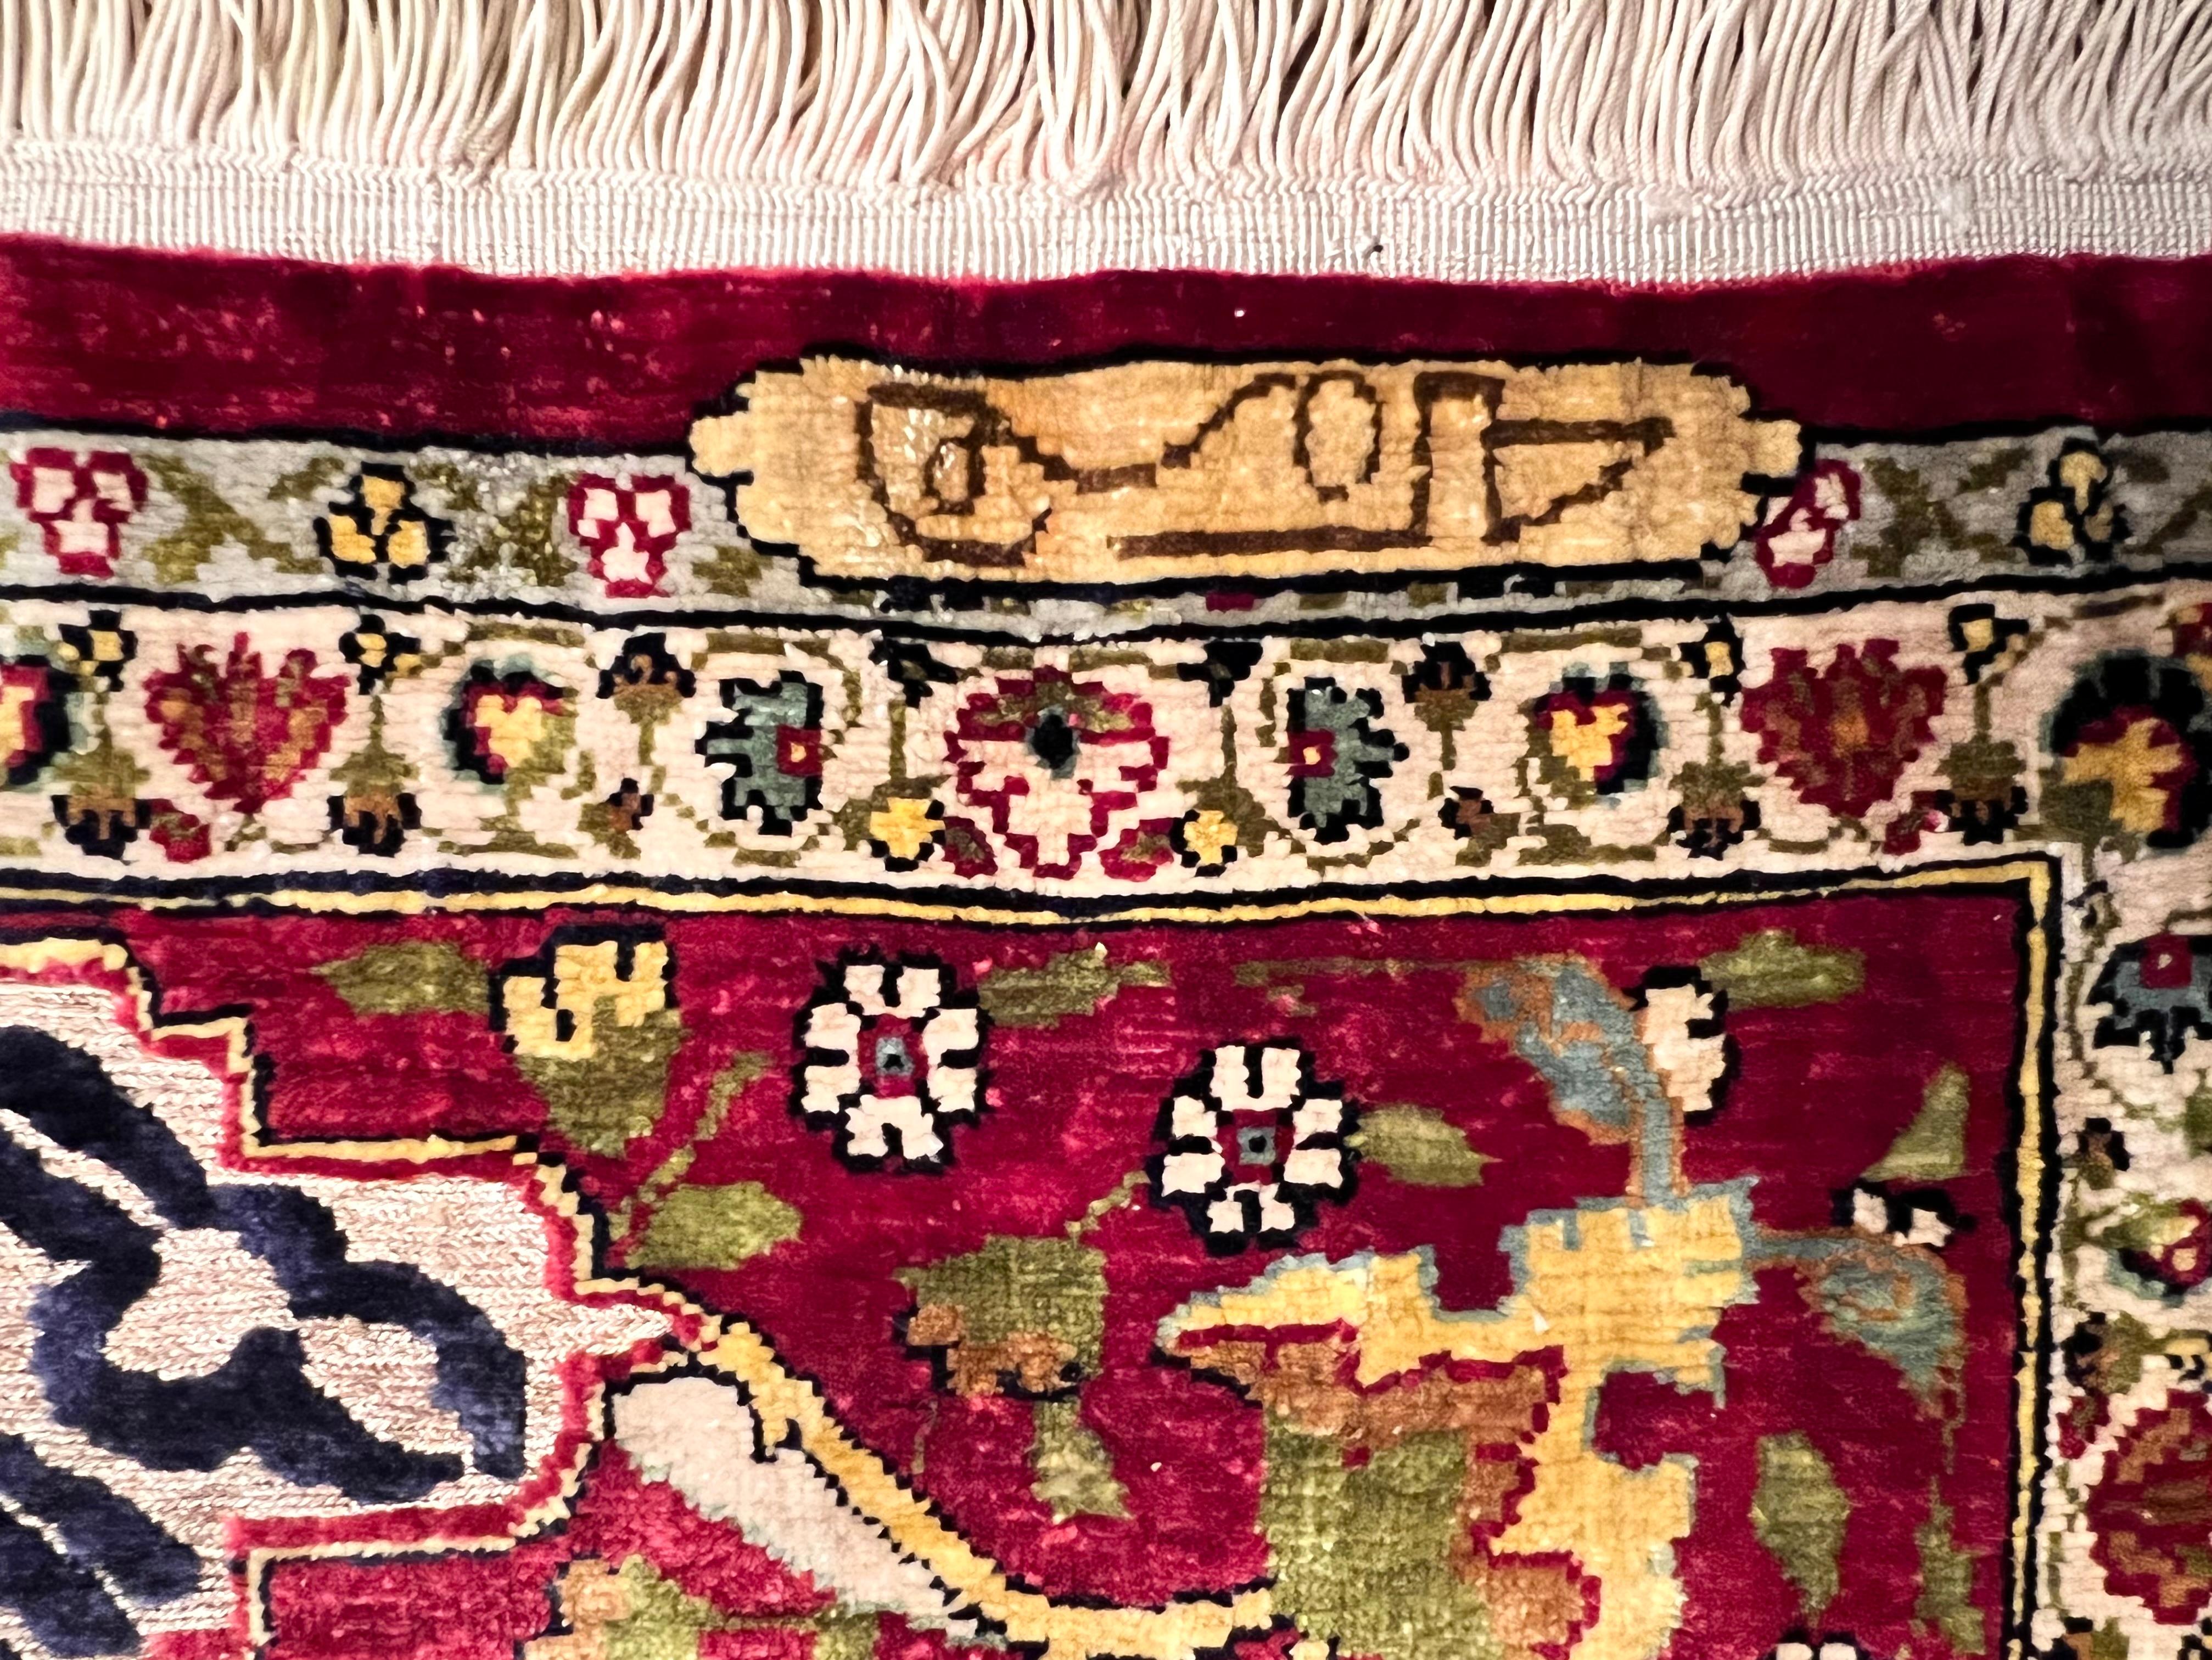 Rare, antique Turkish prayer rug. Signed on the upper right corner.

Material: silk, embroiled gold gilded metal threads.

Finest quality Hereke rug with Kayseri pattern - in excellent condition, as it was never used as a islamic prayer rug, but